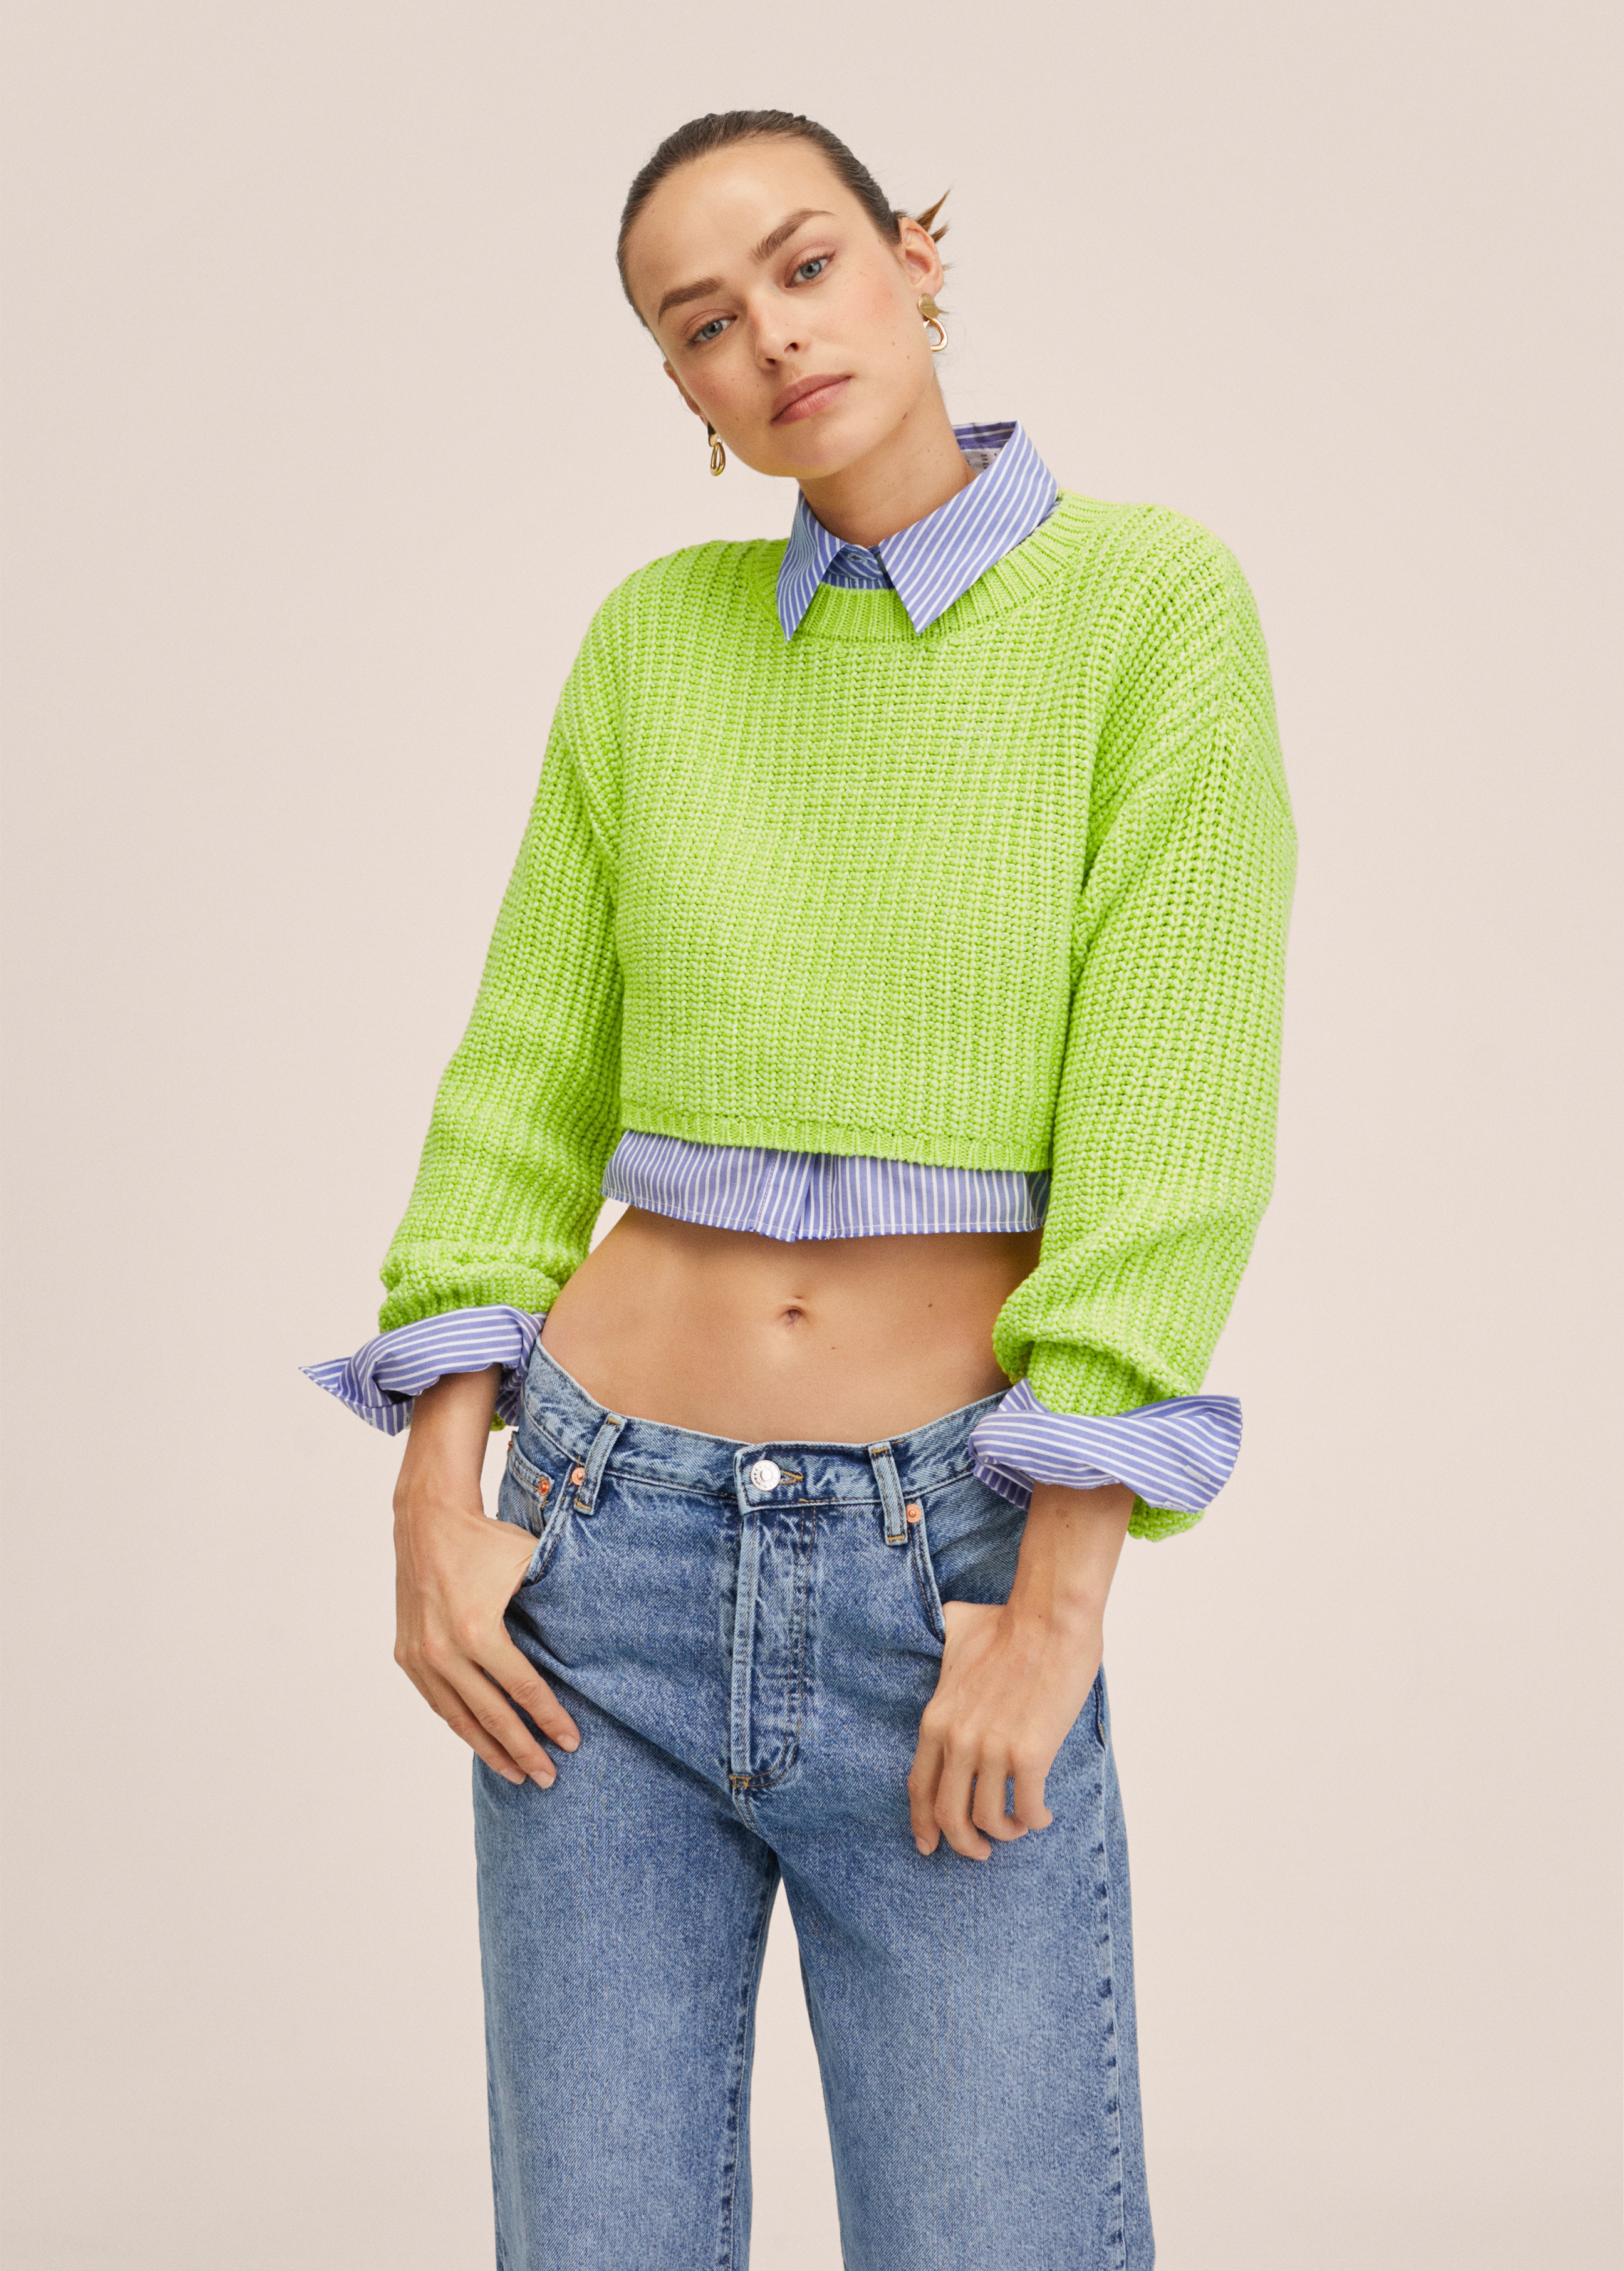 Knitted cropped sweater - Medium plane